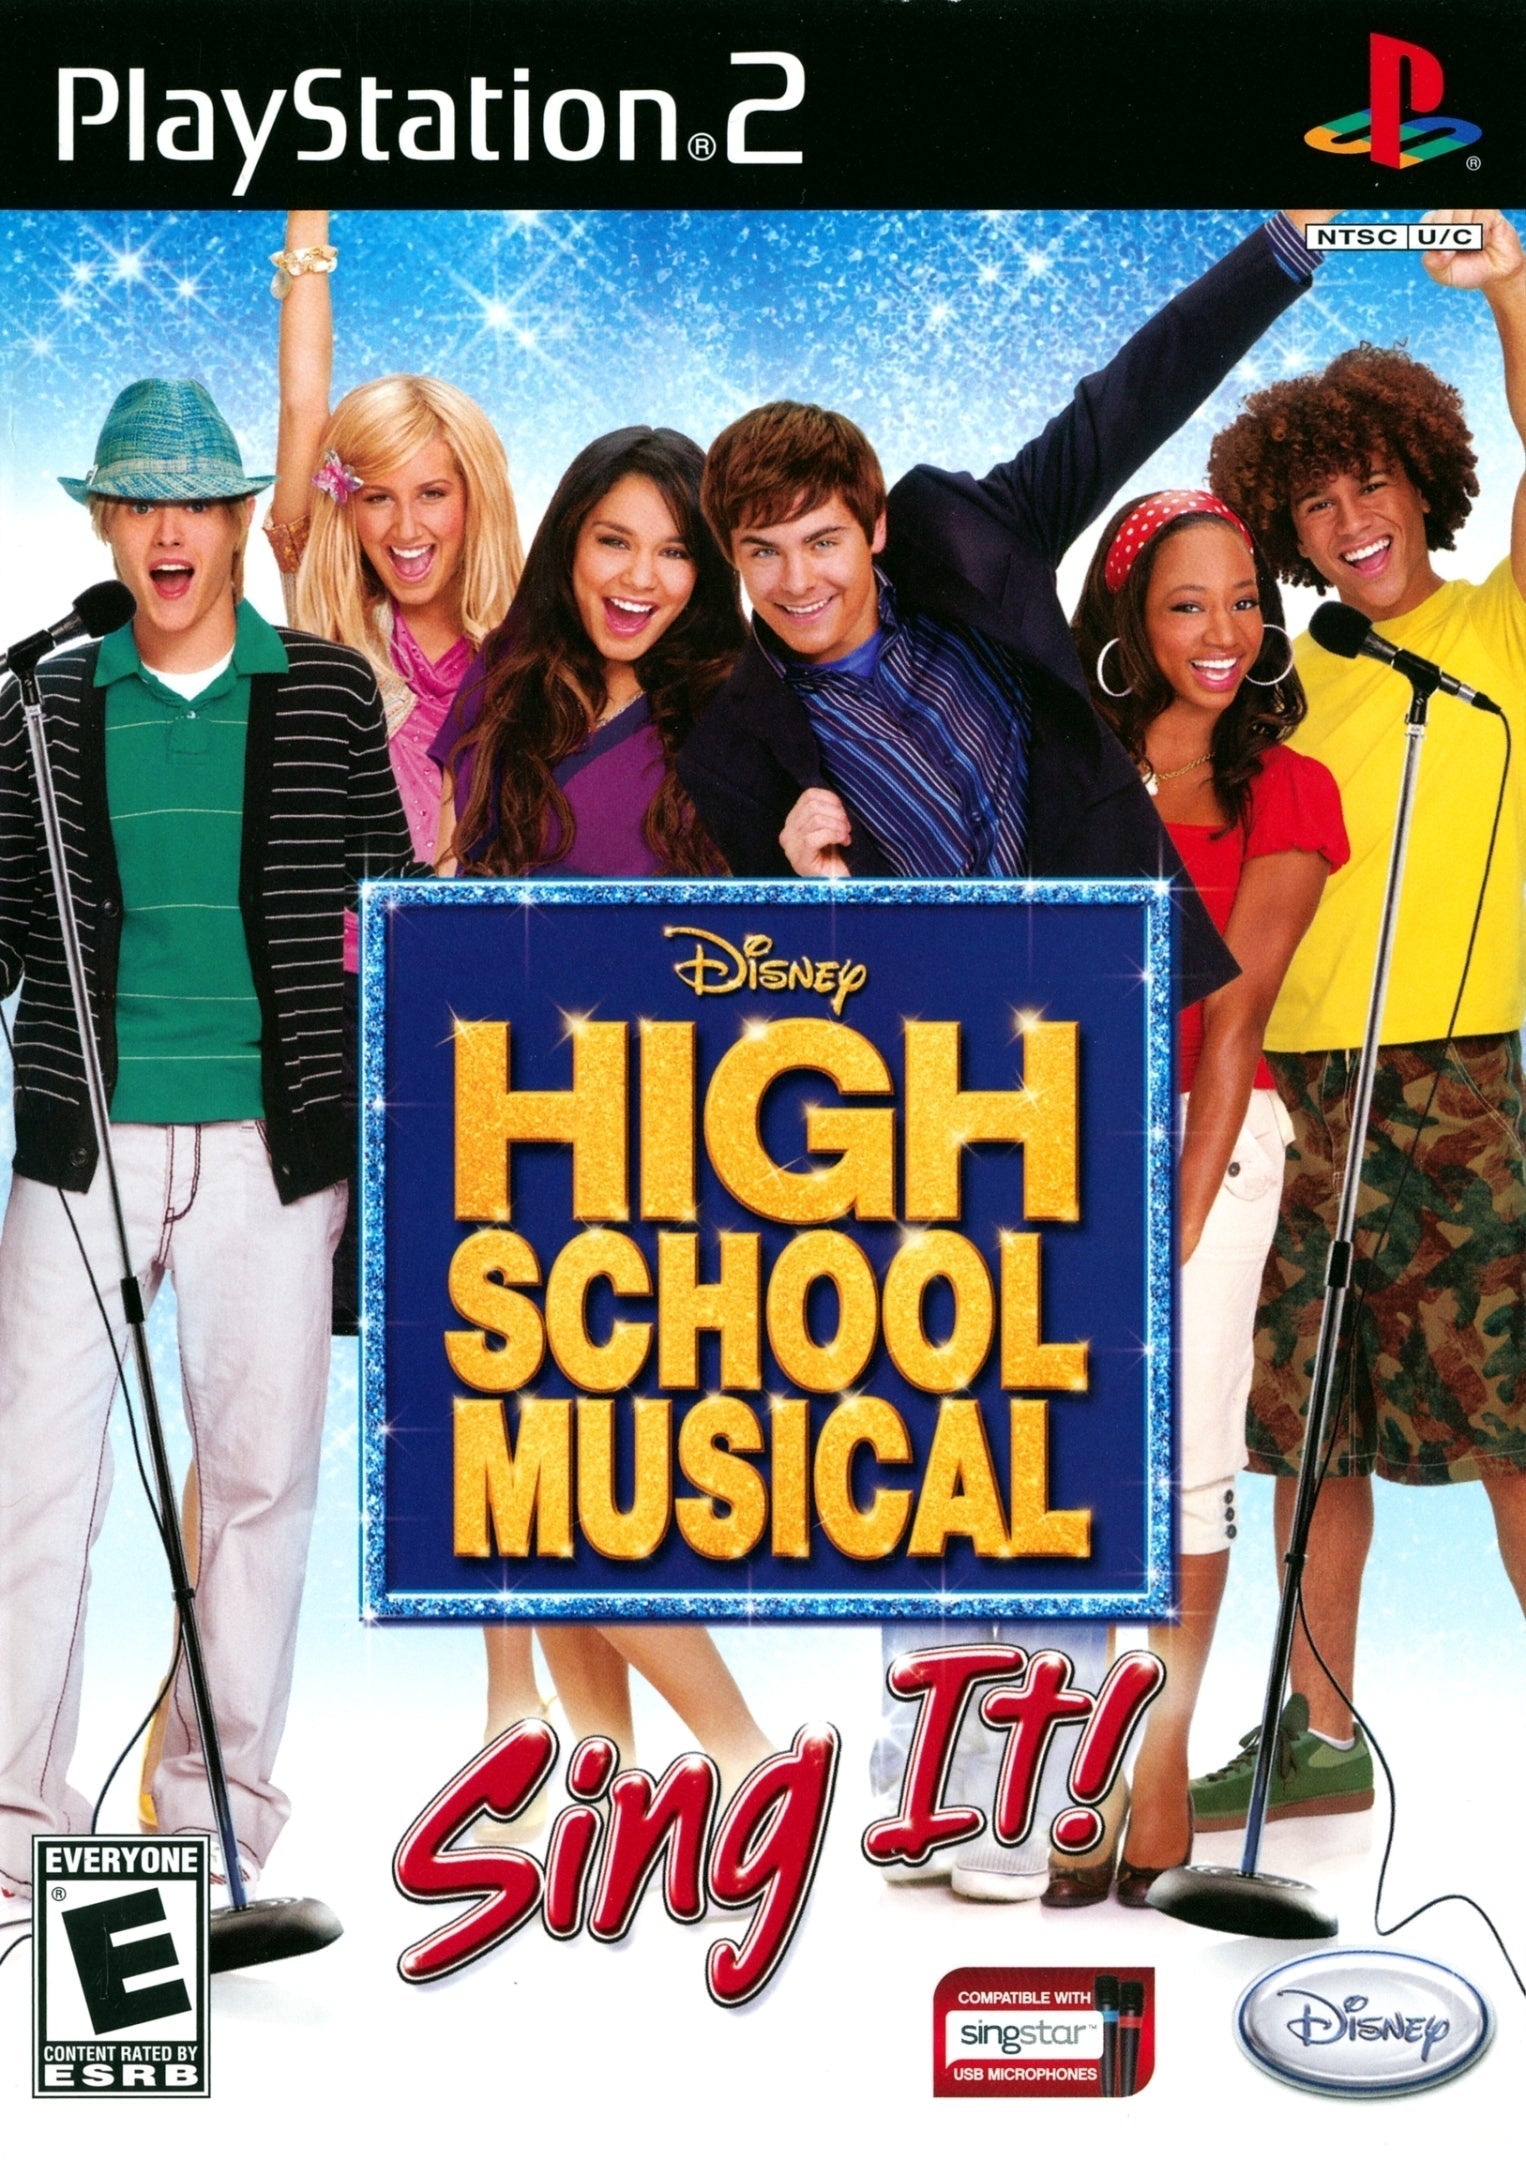 High School Musical: Sing It! - PlayStation 2 (PS2) Game